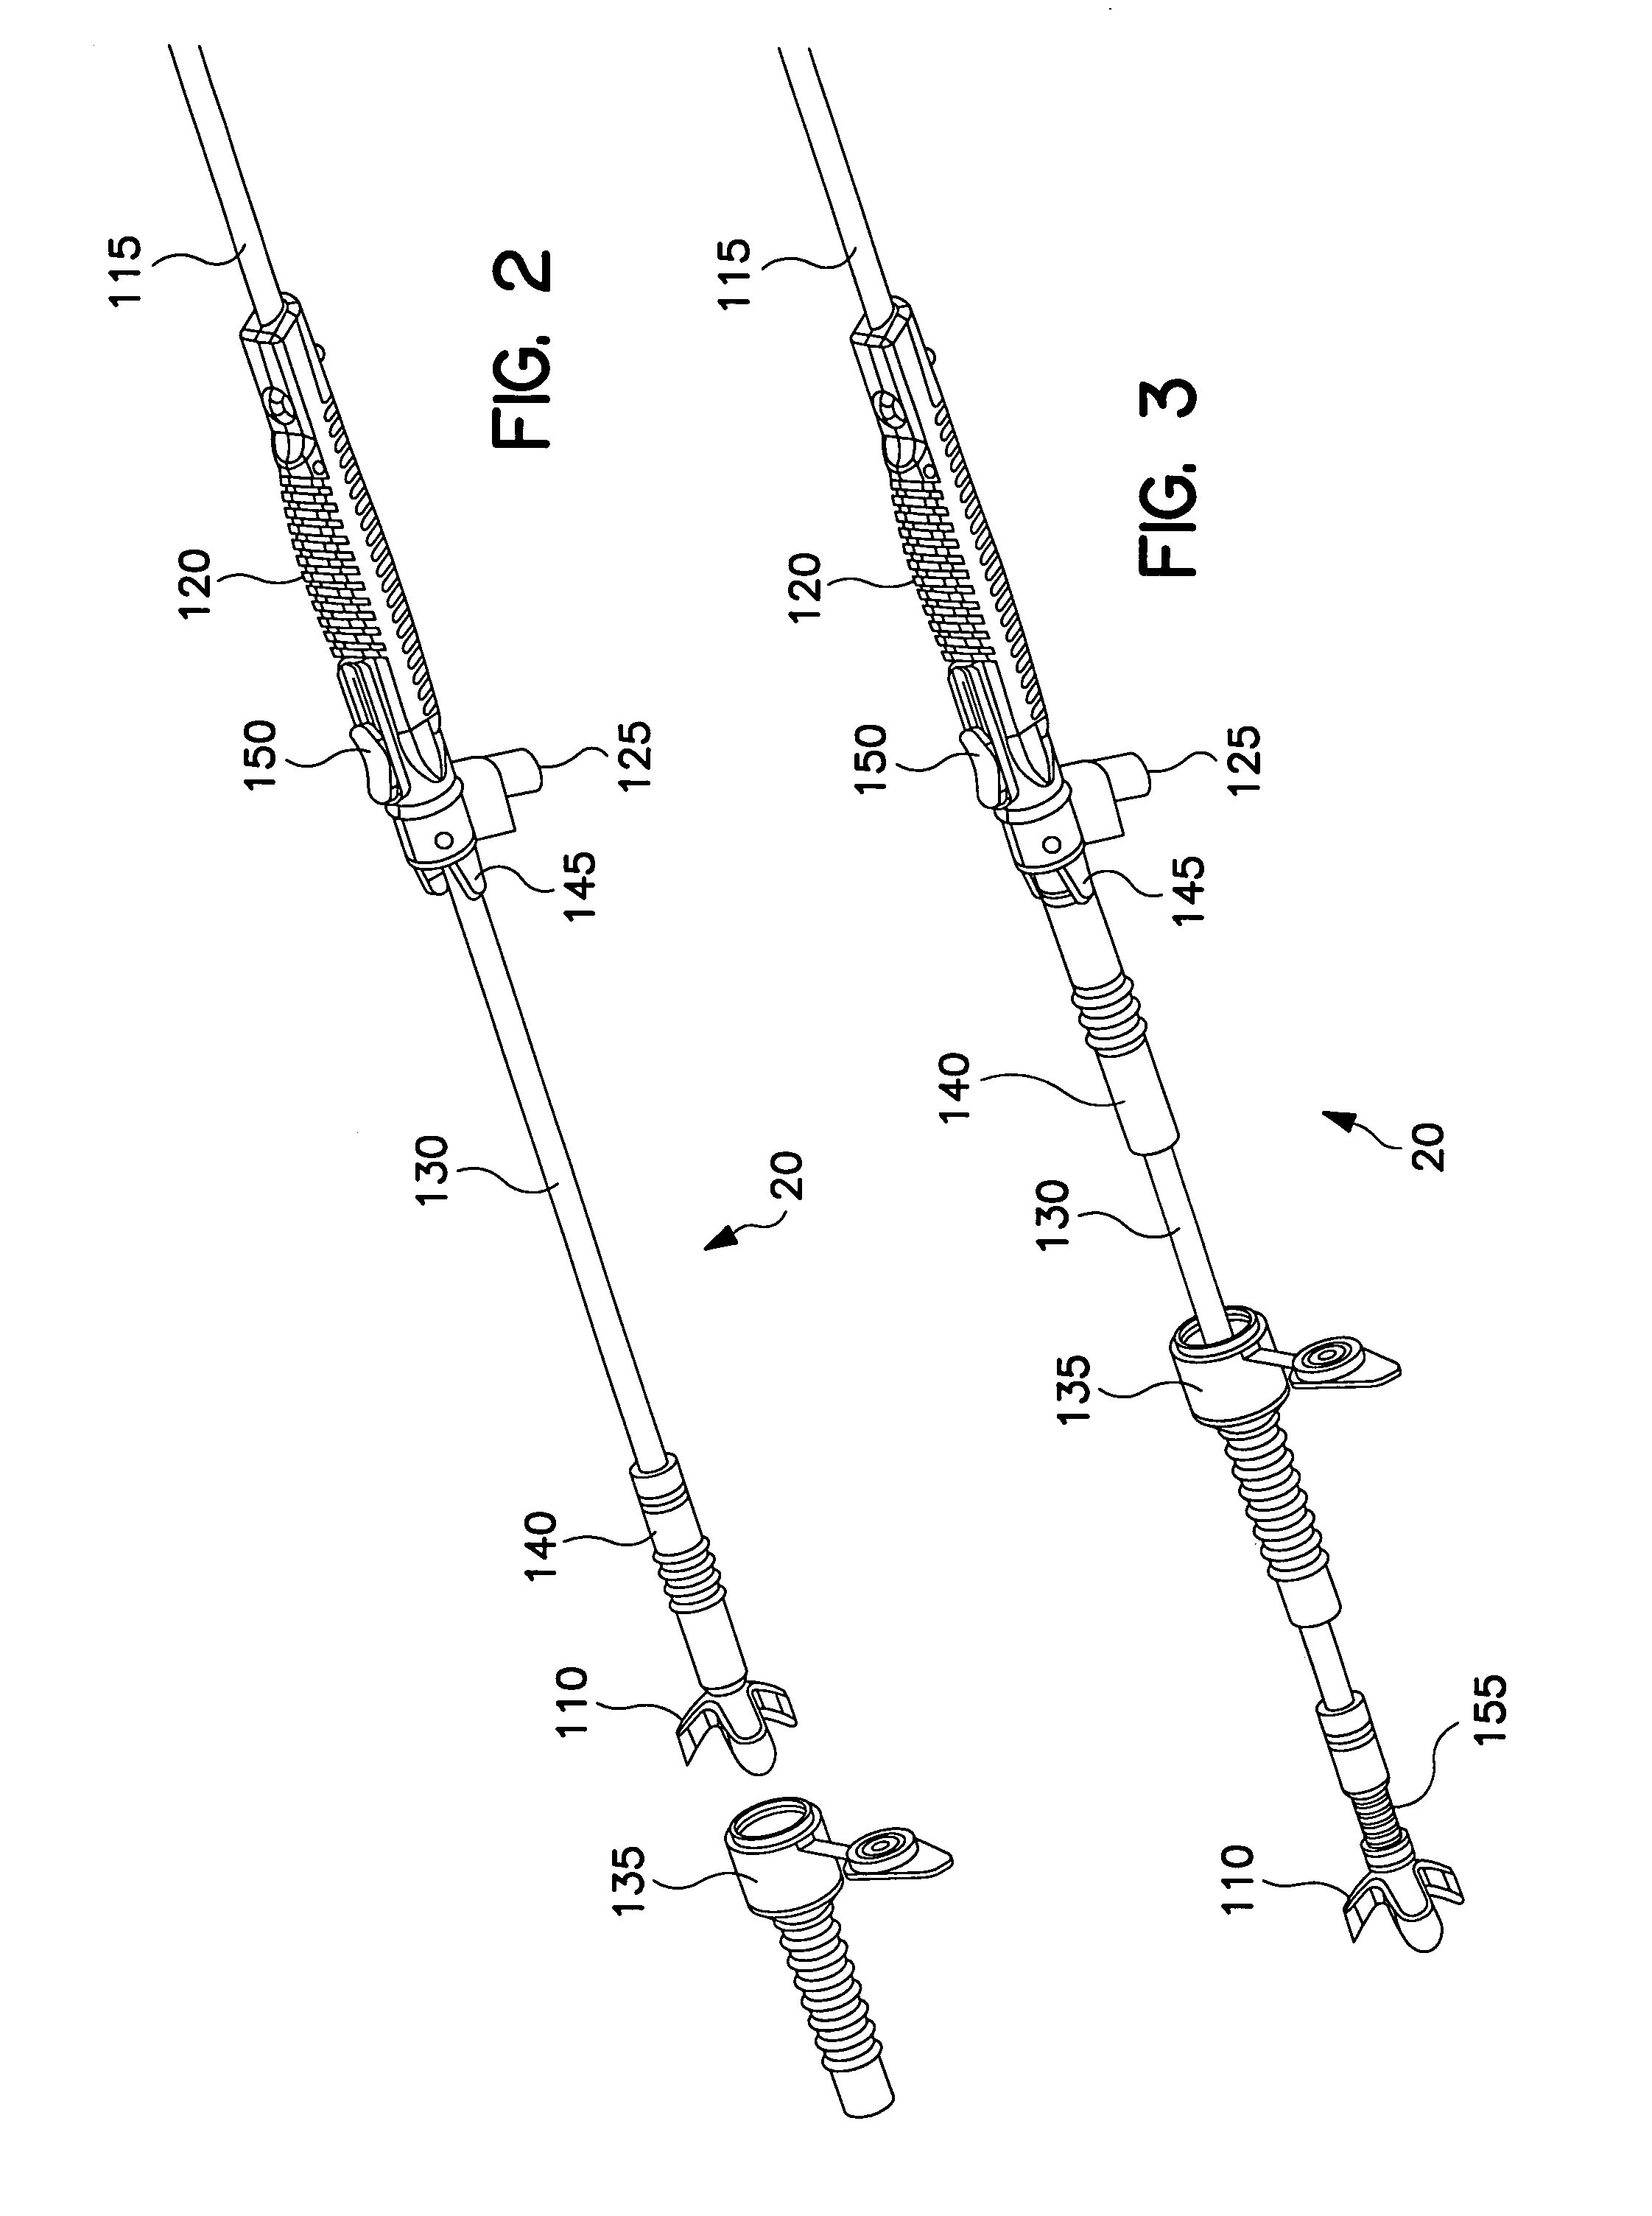 Method and system for organ positioning and stabilization